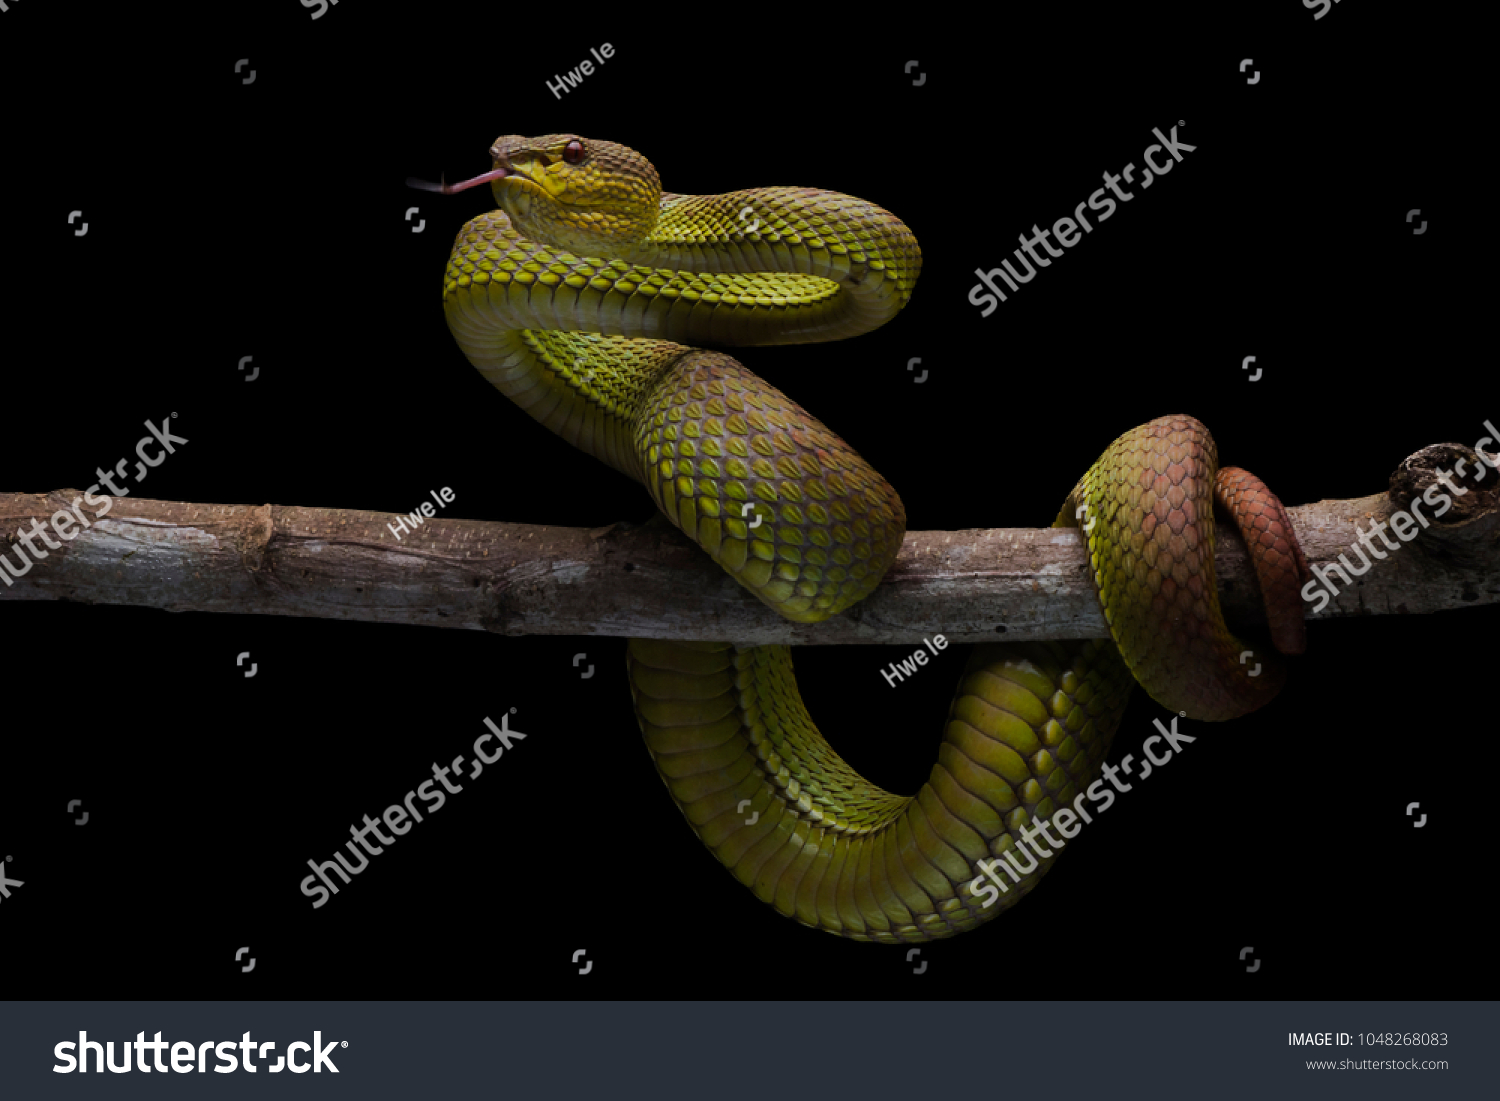 One of the high venom snake. This Snake is endemic reptile in java. It's very dangerous snake anda have deadly bite. #1048268083